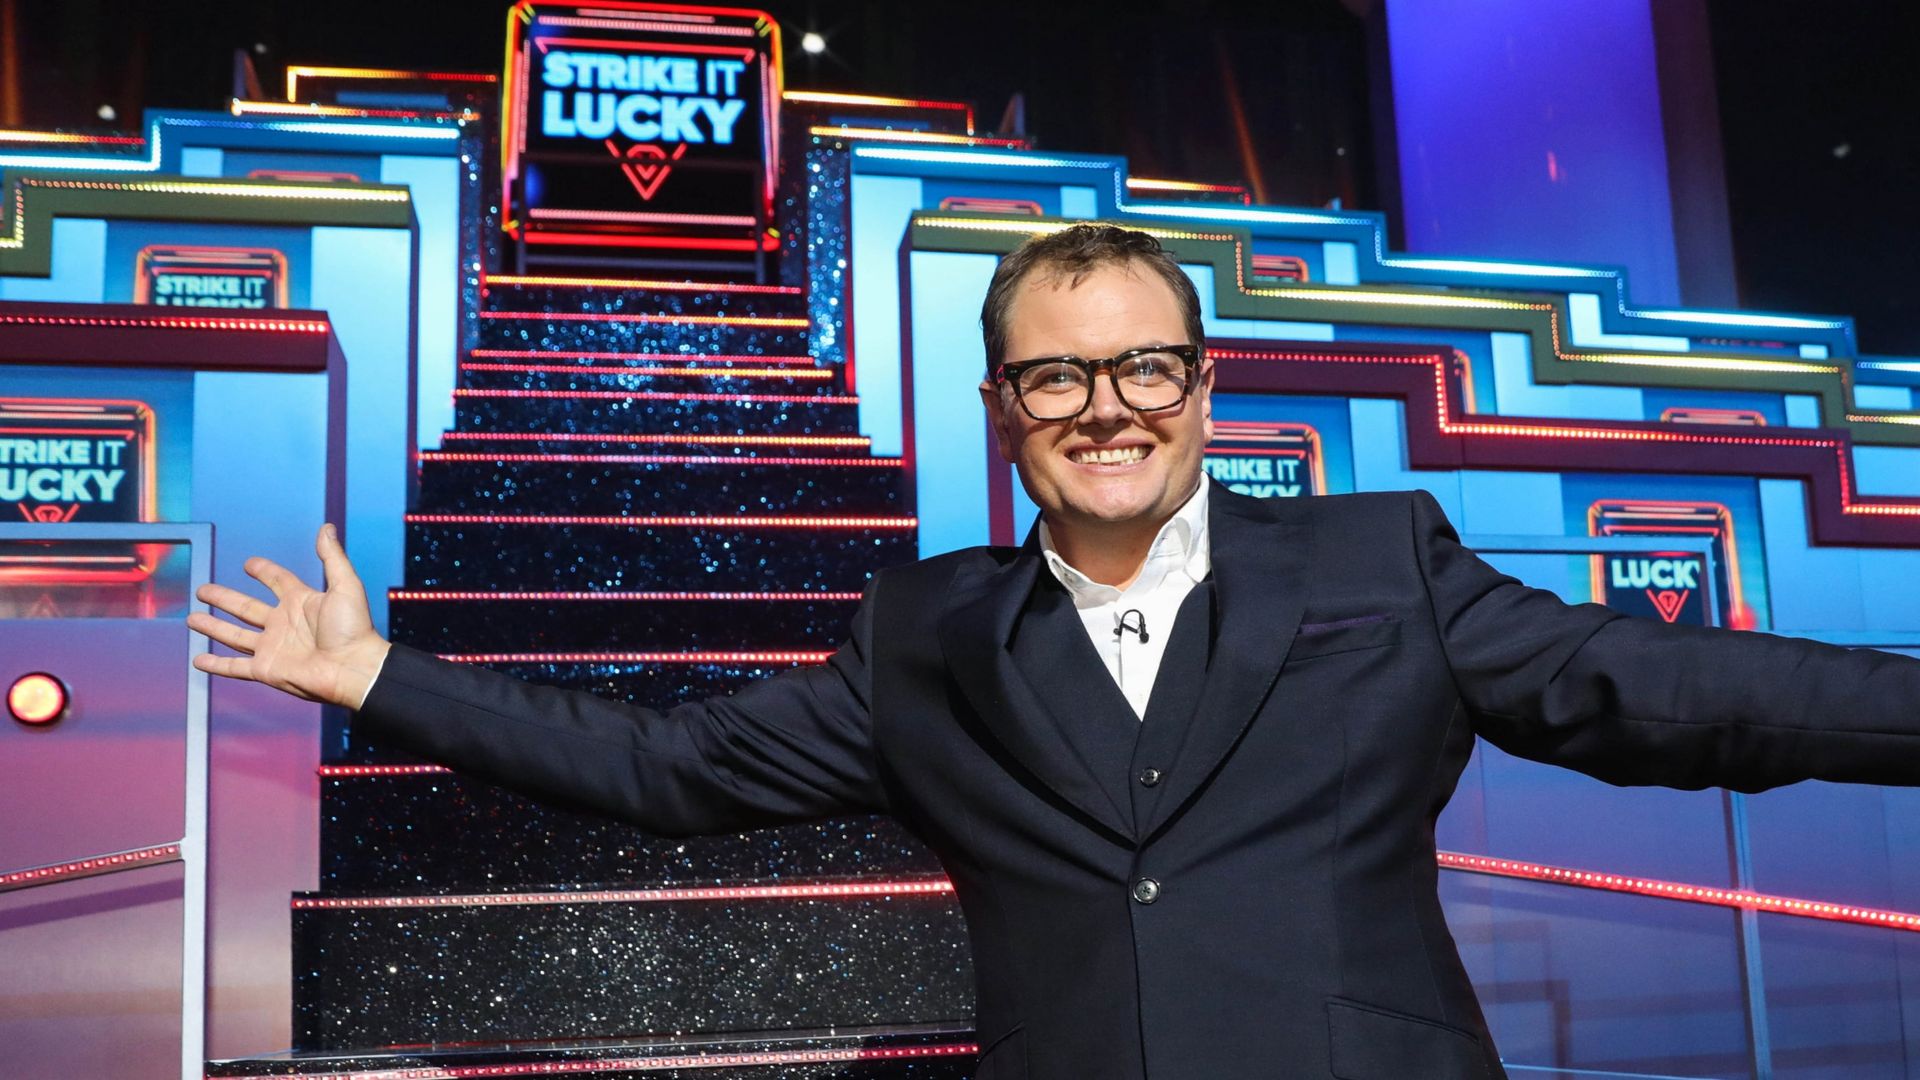 Alan Carr's Epic Gameshow background